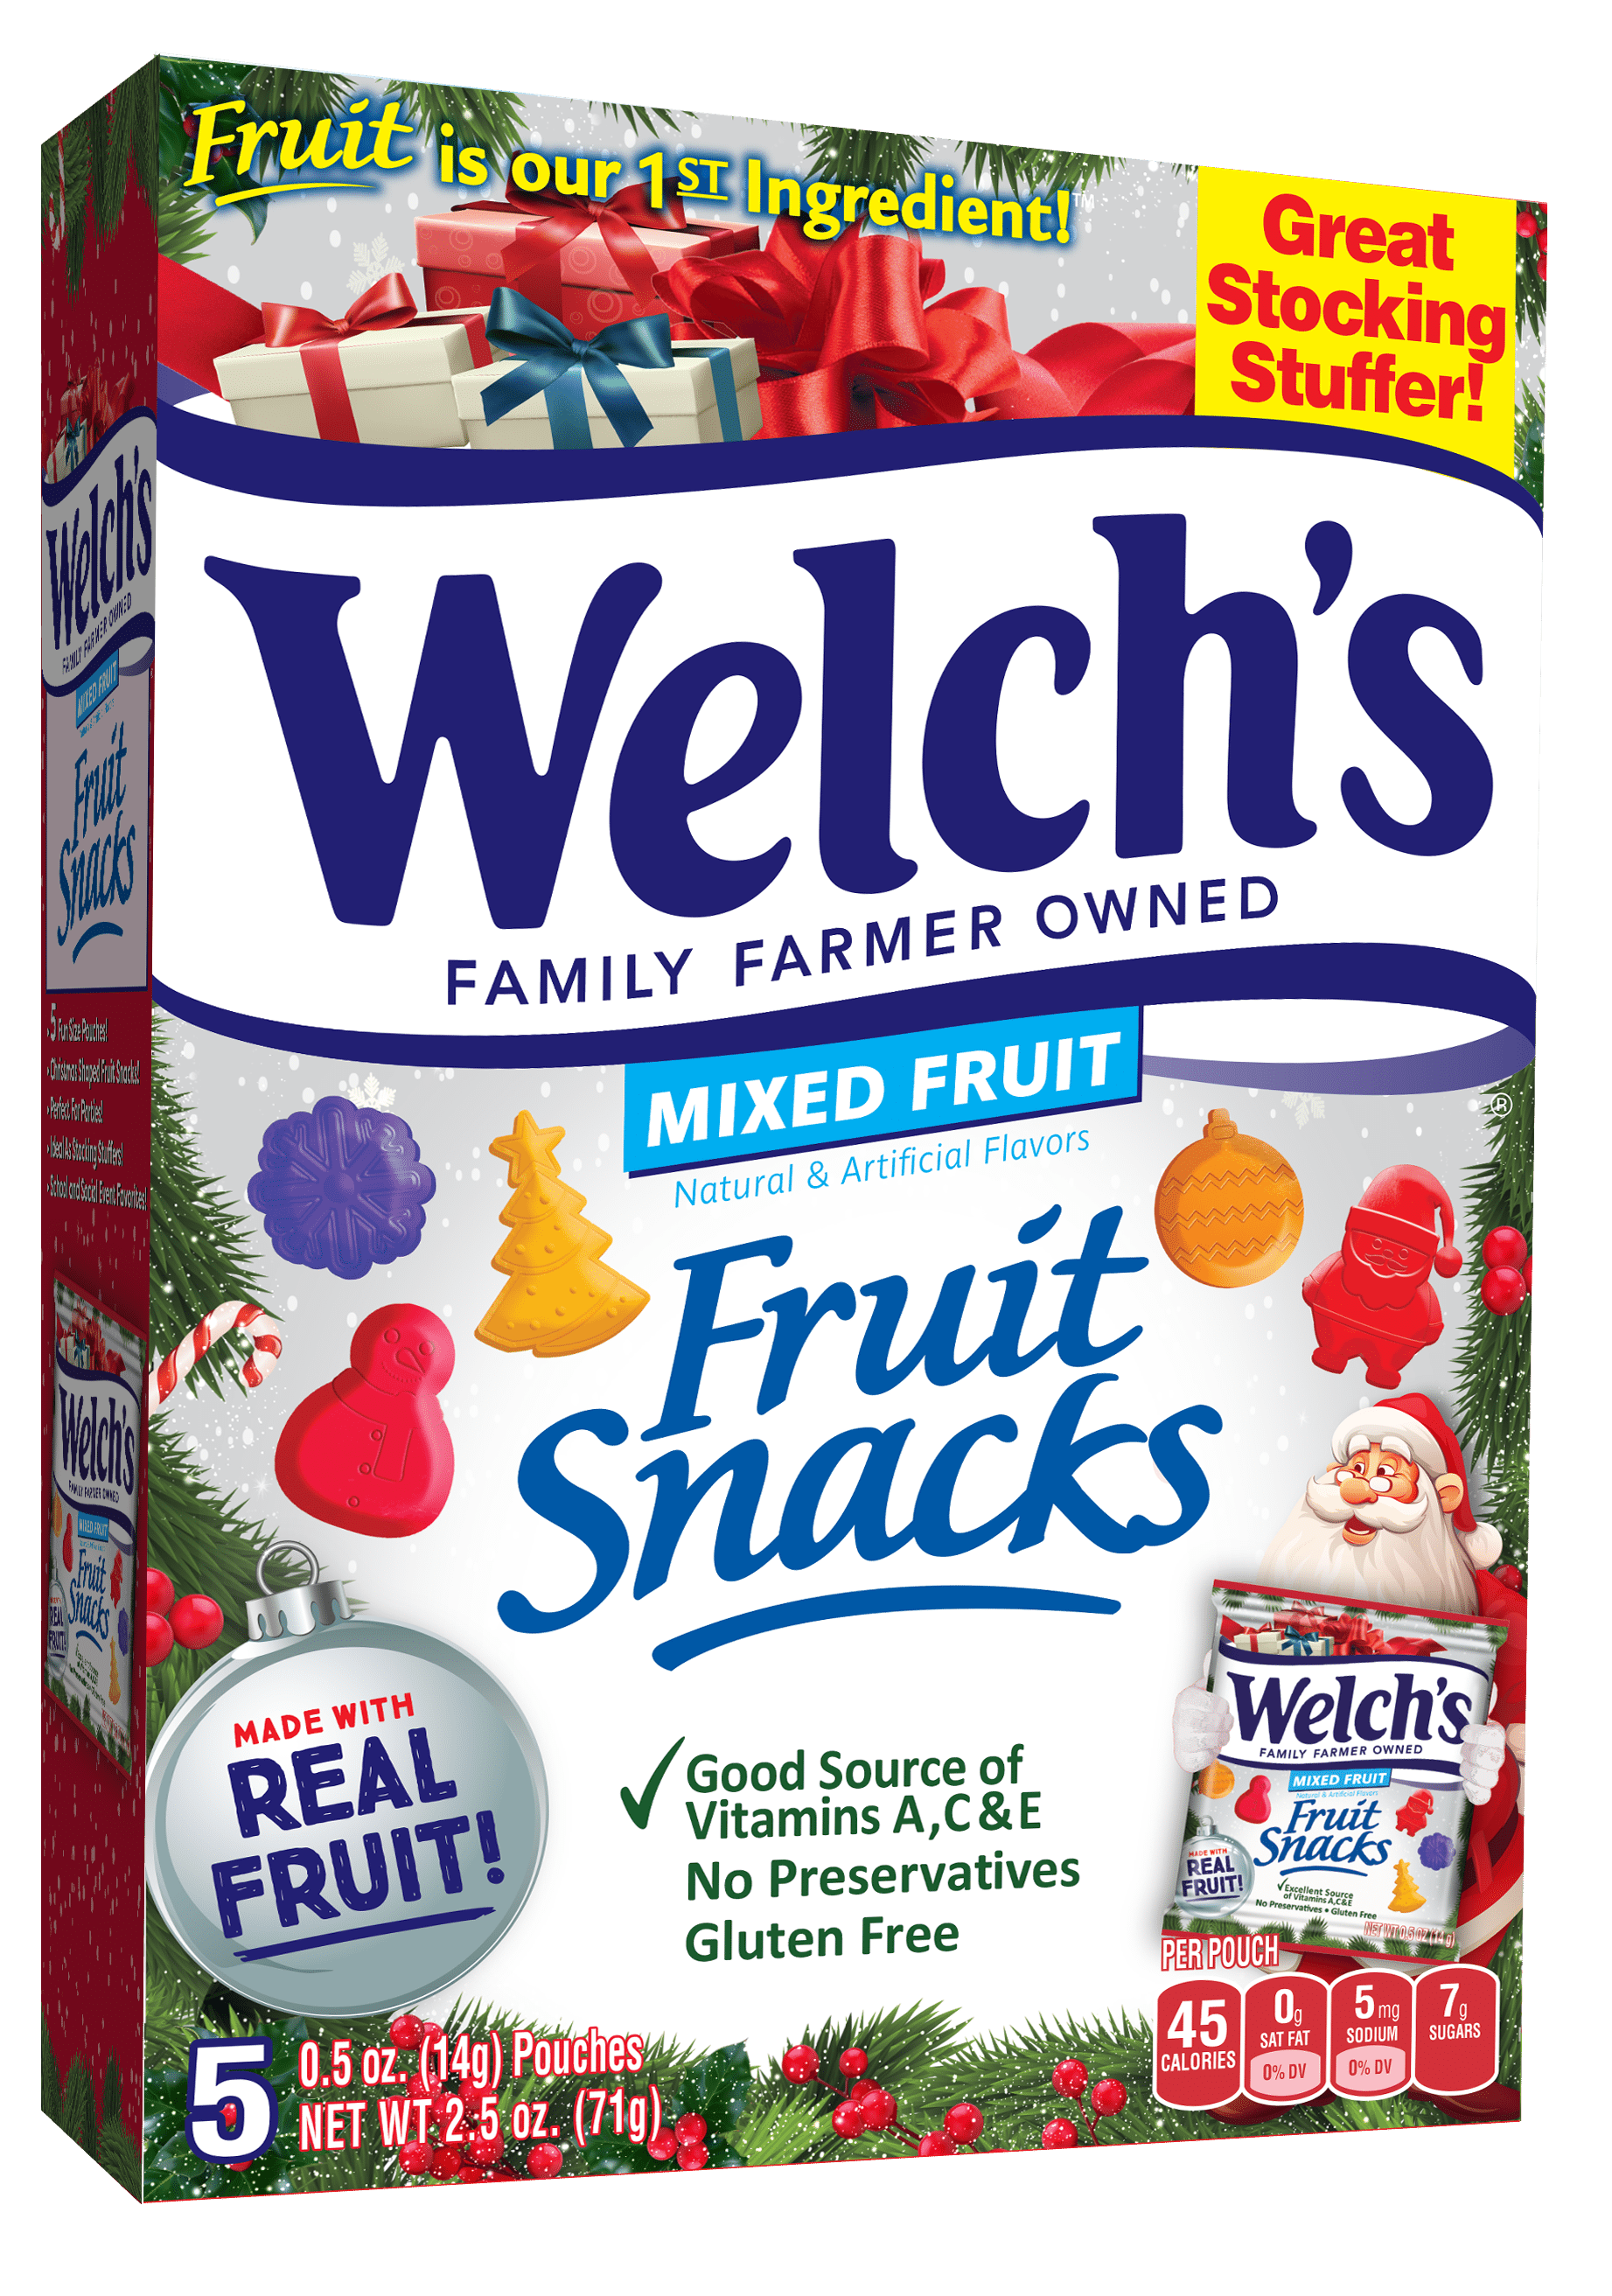 Welch's Christmas Shapes Stocking Stuffers